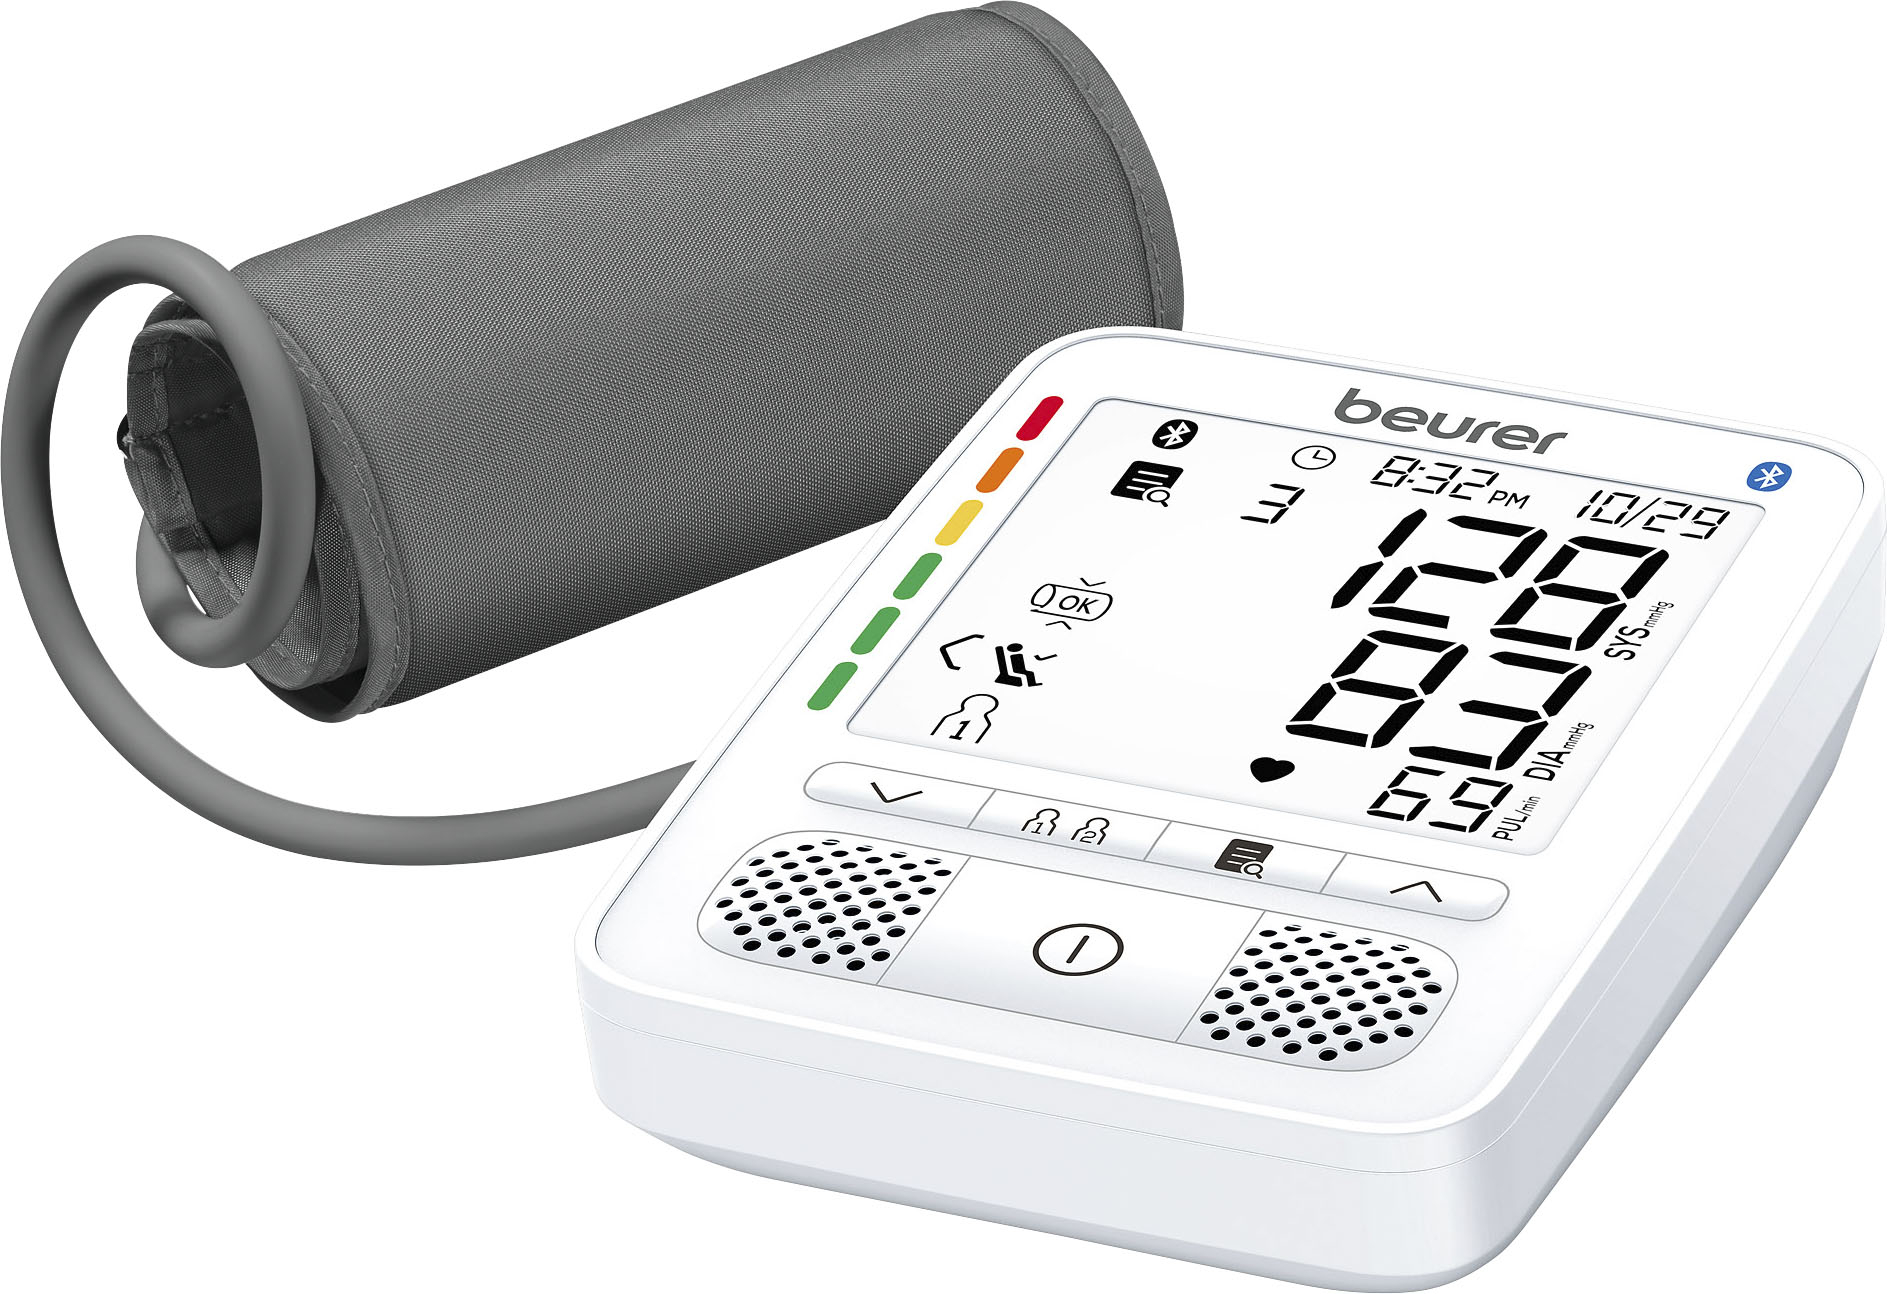 Withings Blood Pressure Monitor (BP-800) for sale online